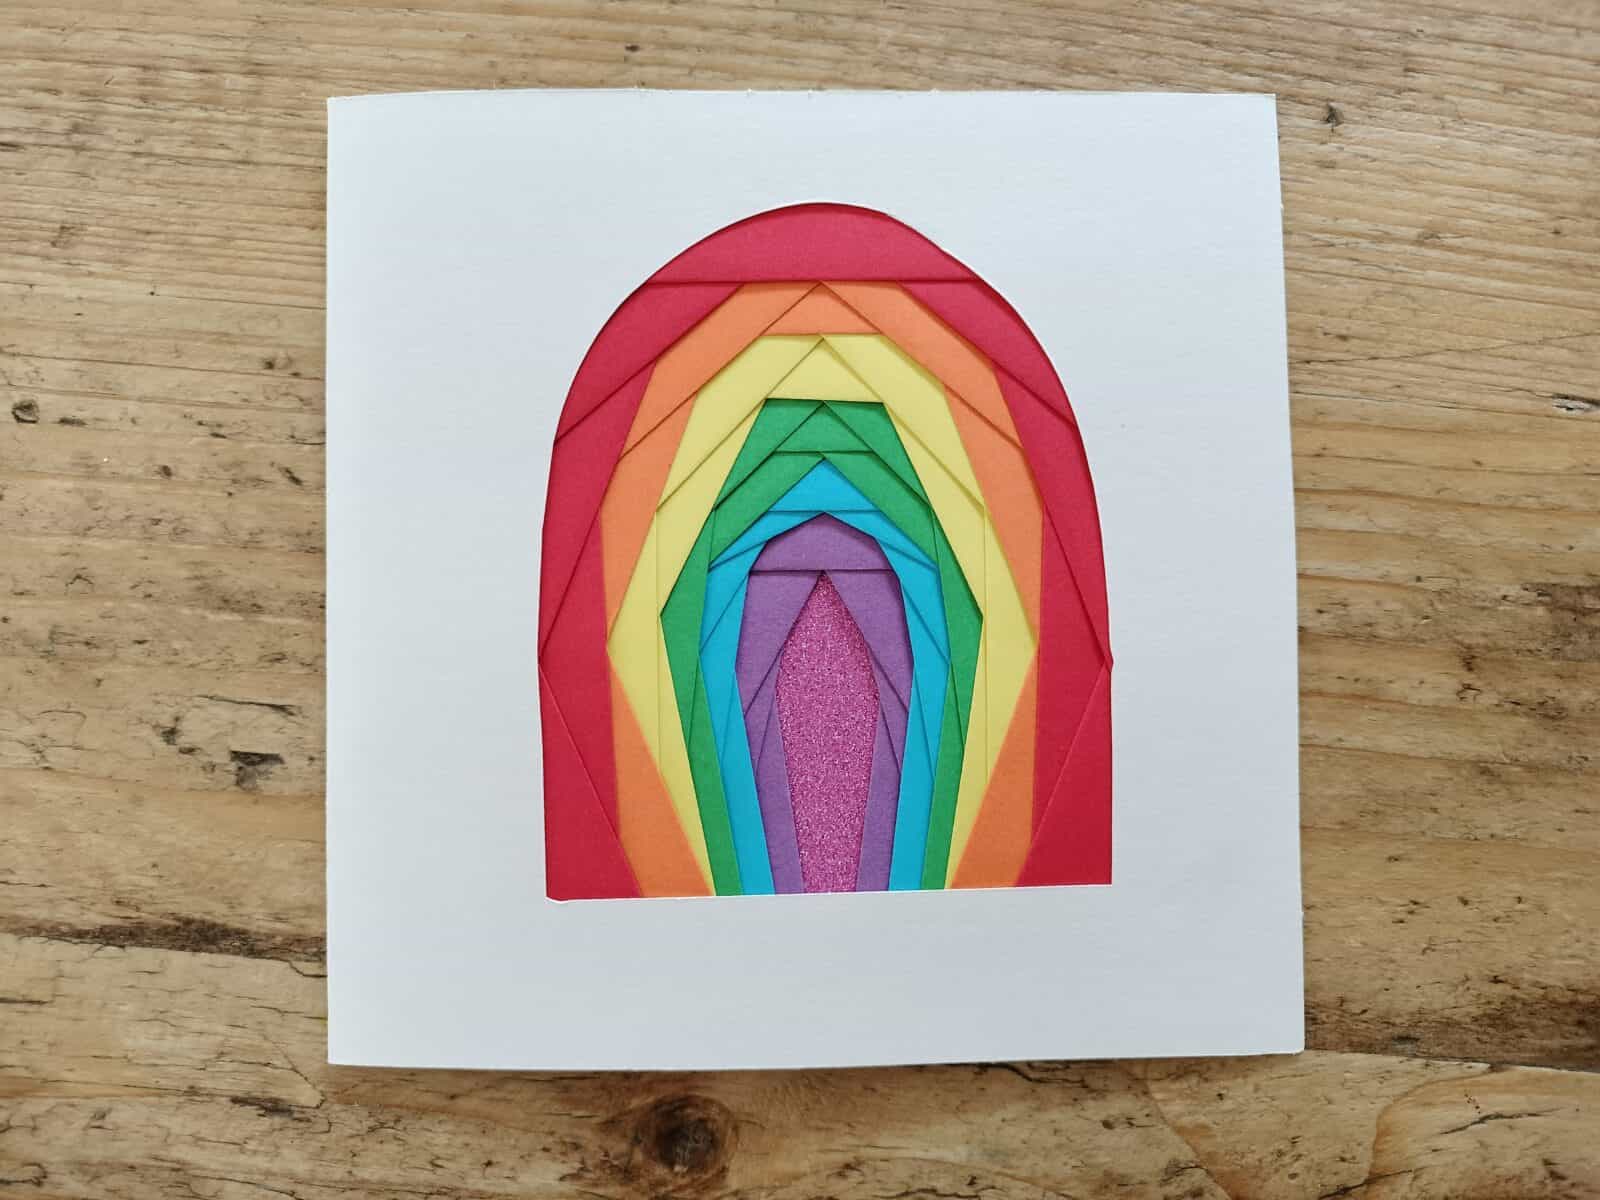 Iris folding card - vaulted archway using rainbow colours that start at red on the outside, then orange, yellow, green, blue, purple and pink sparkly card.